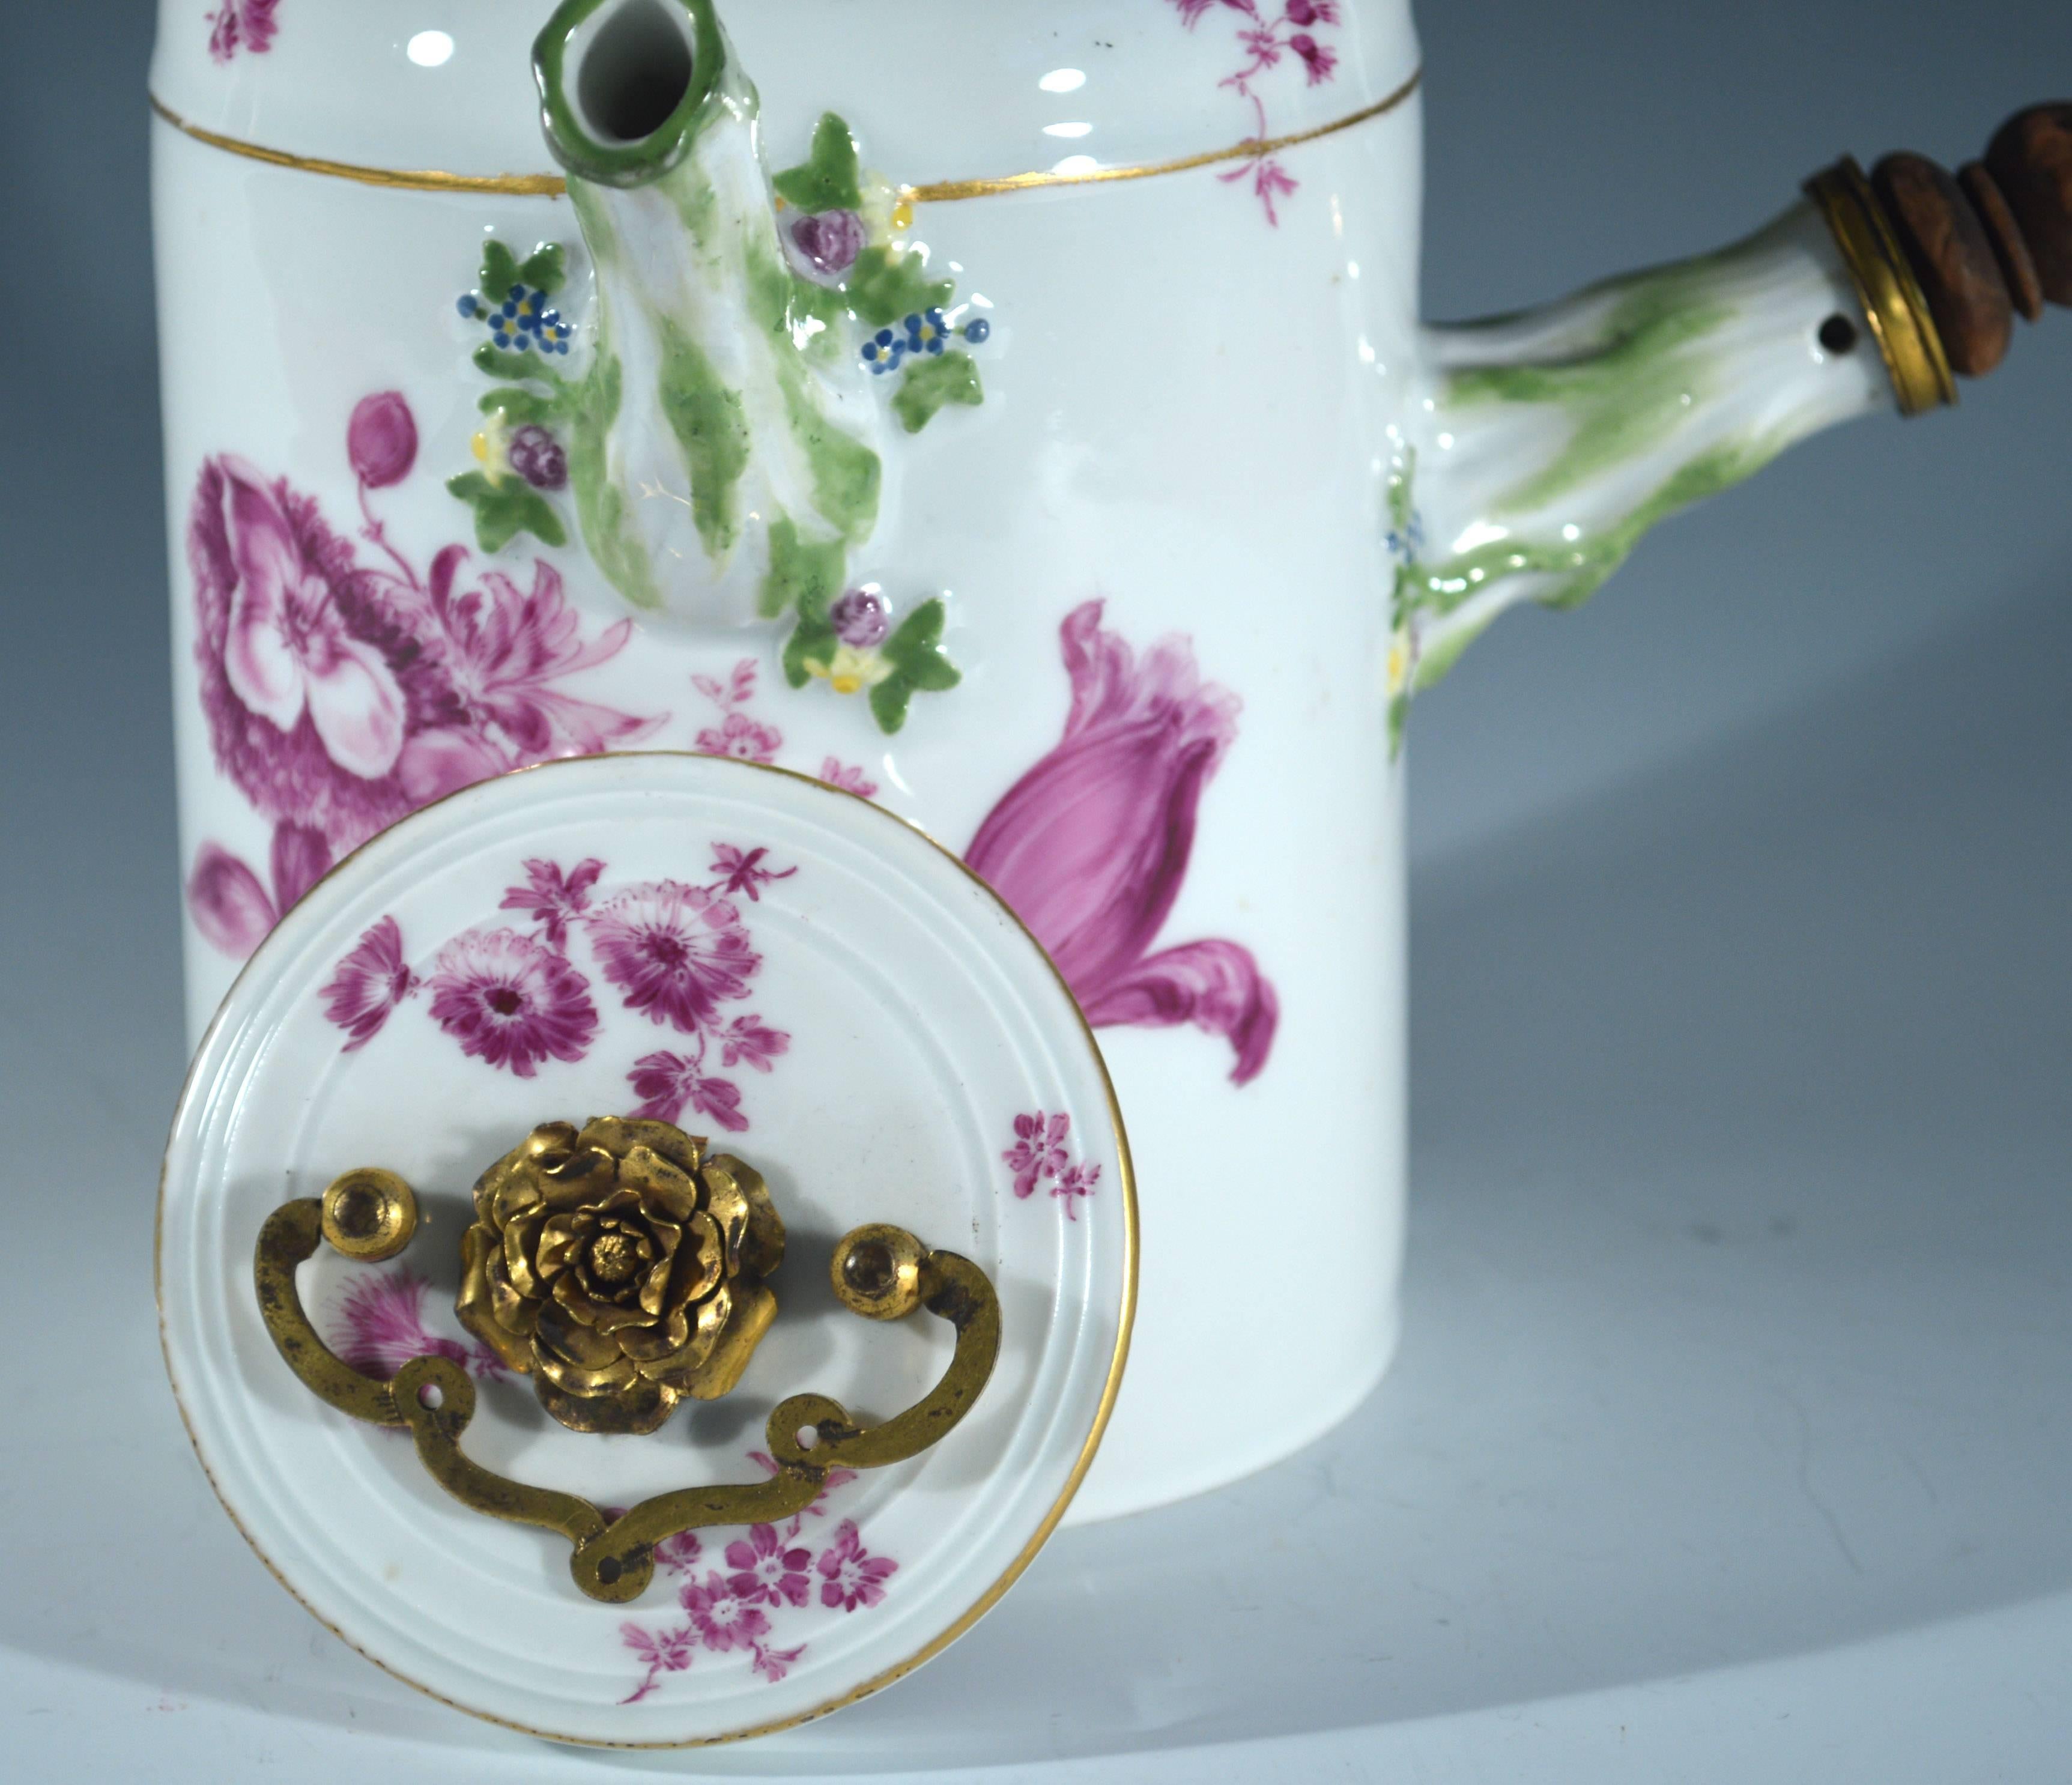 Meissen gilt-metal mounted porcelain chocolate pot and cover,
circa 1760

The large Meissen Porcelain chocolate pot has a leaf form handle with a wooden grip. The handle and spout moulded and painted as flowering stems. The body and cover well